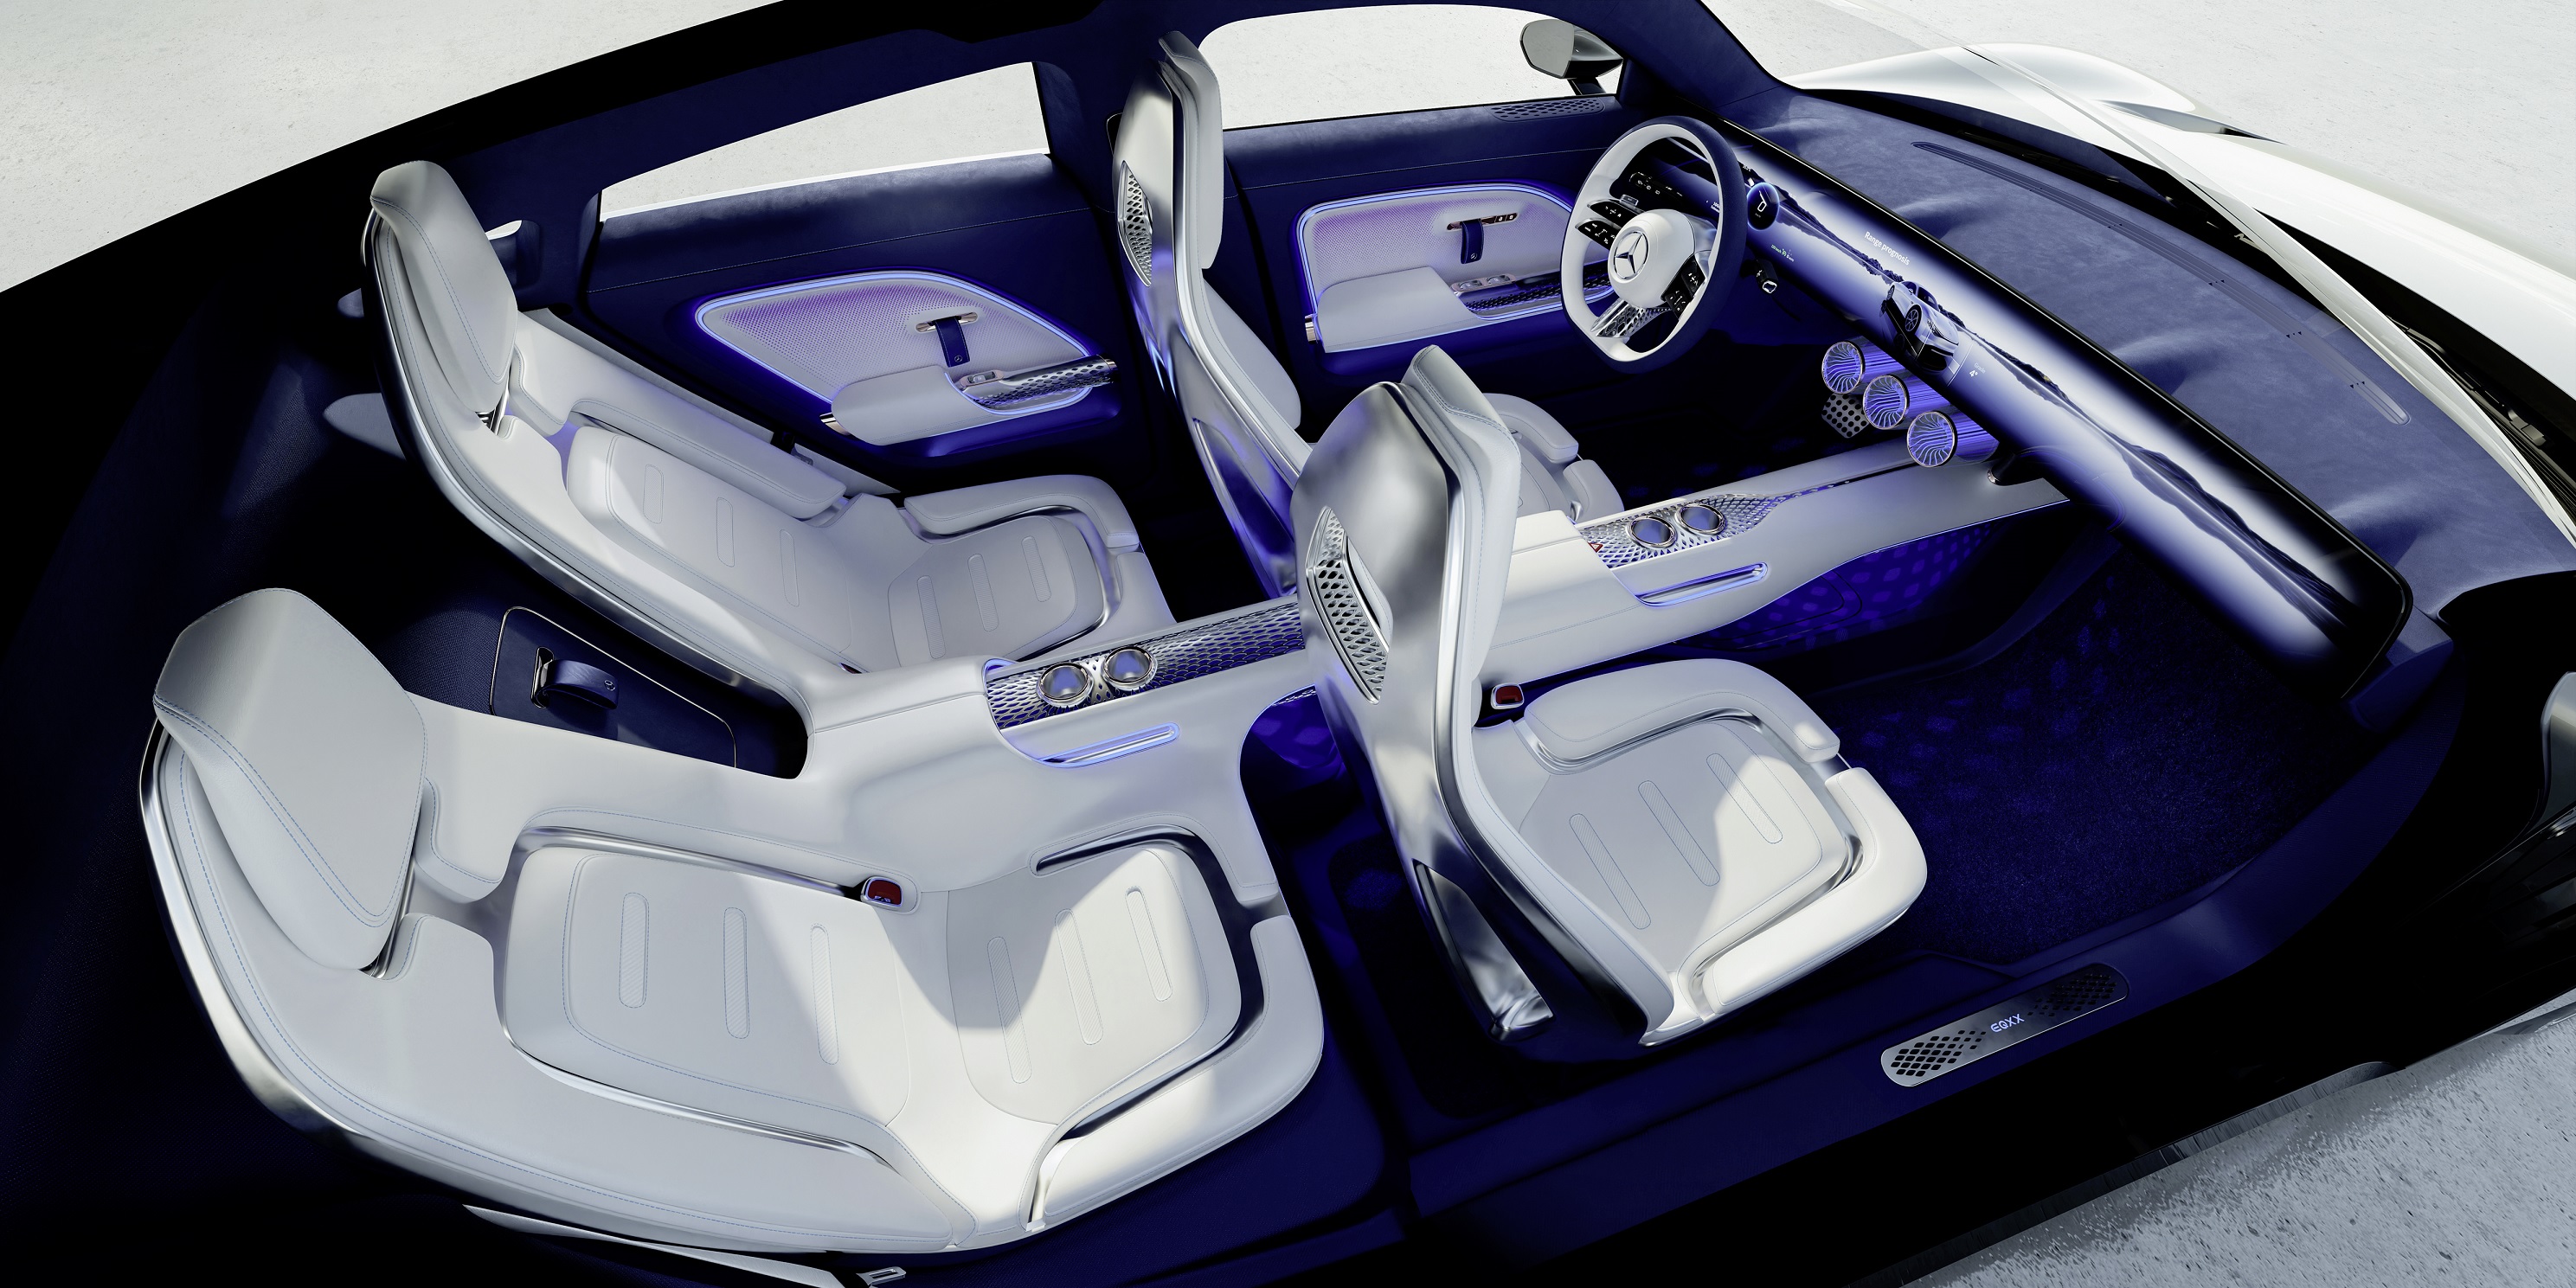 The Mercedes-Benz Vision EQXX Concept's blue-and-white interior